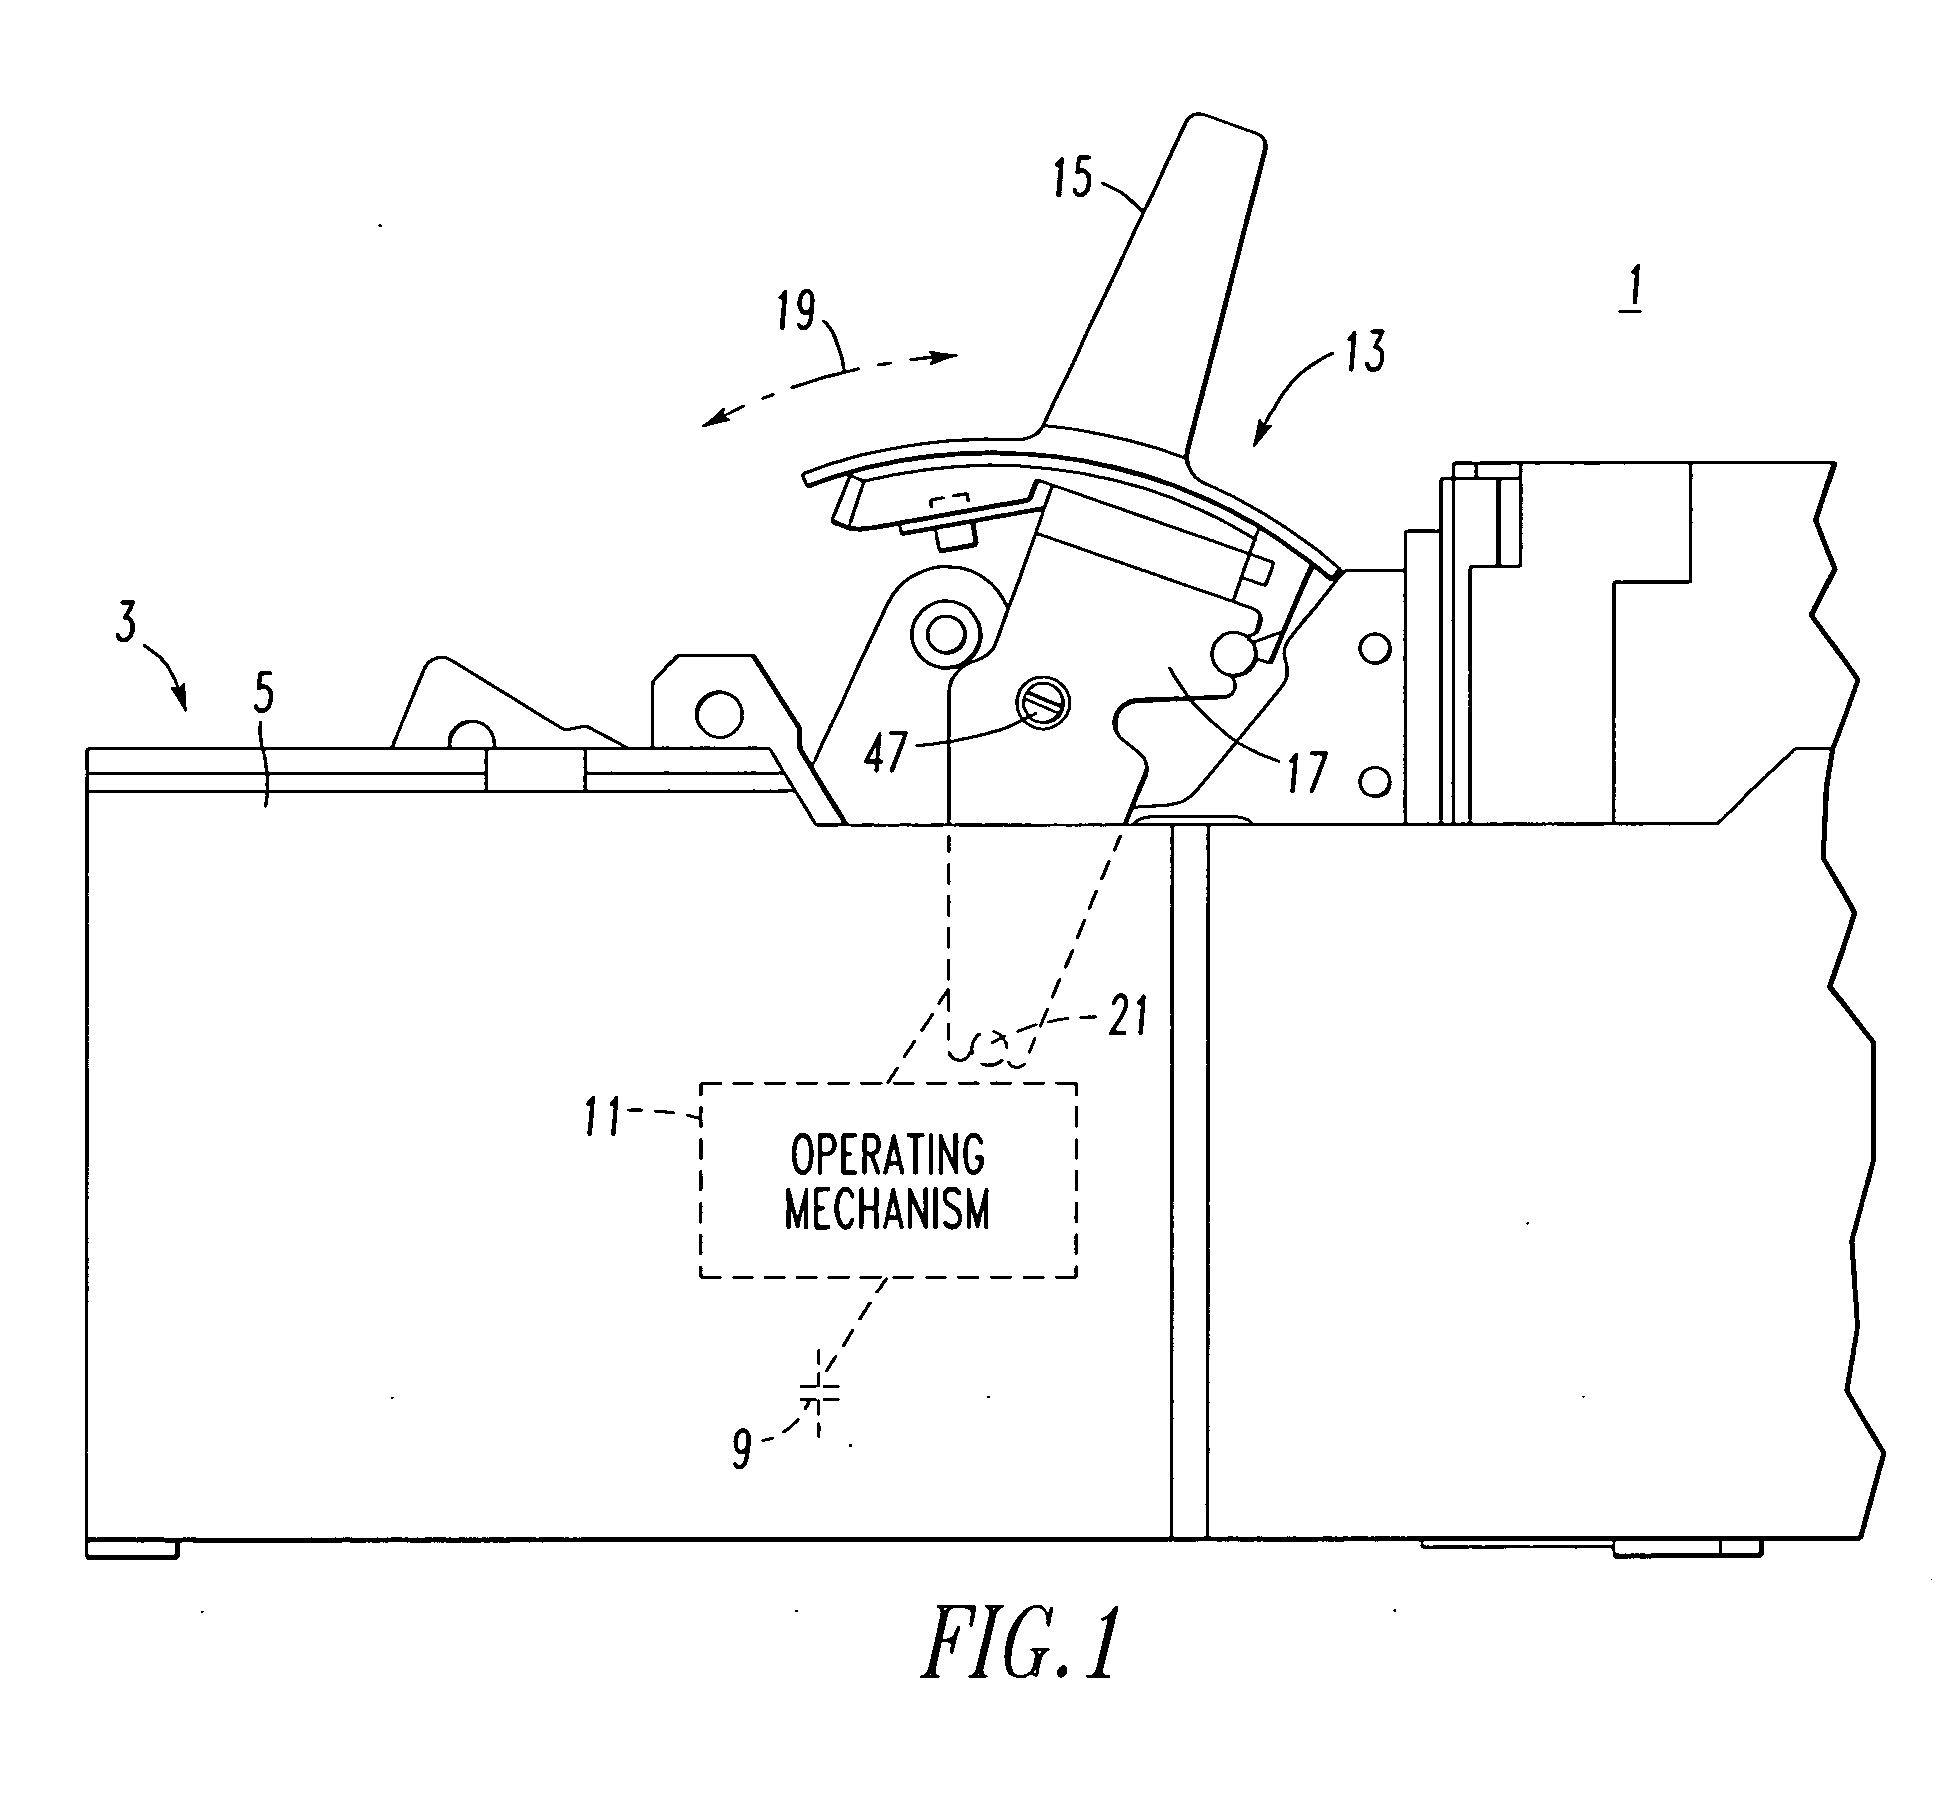 Undervoltage release and circuit breaker incorporating same